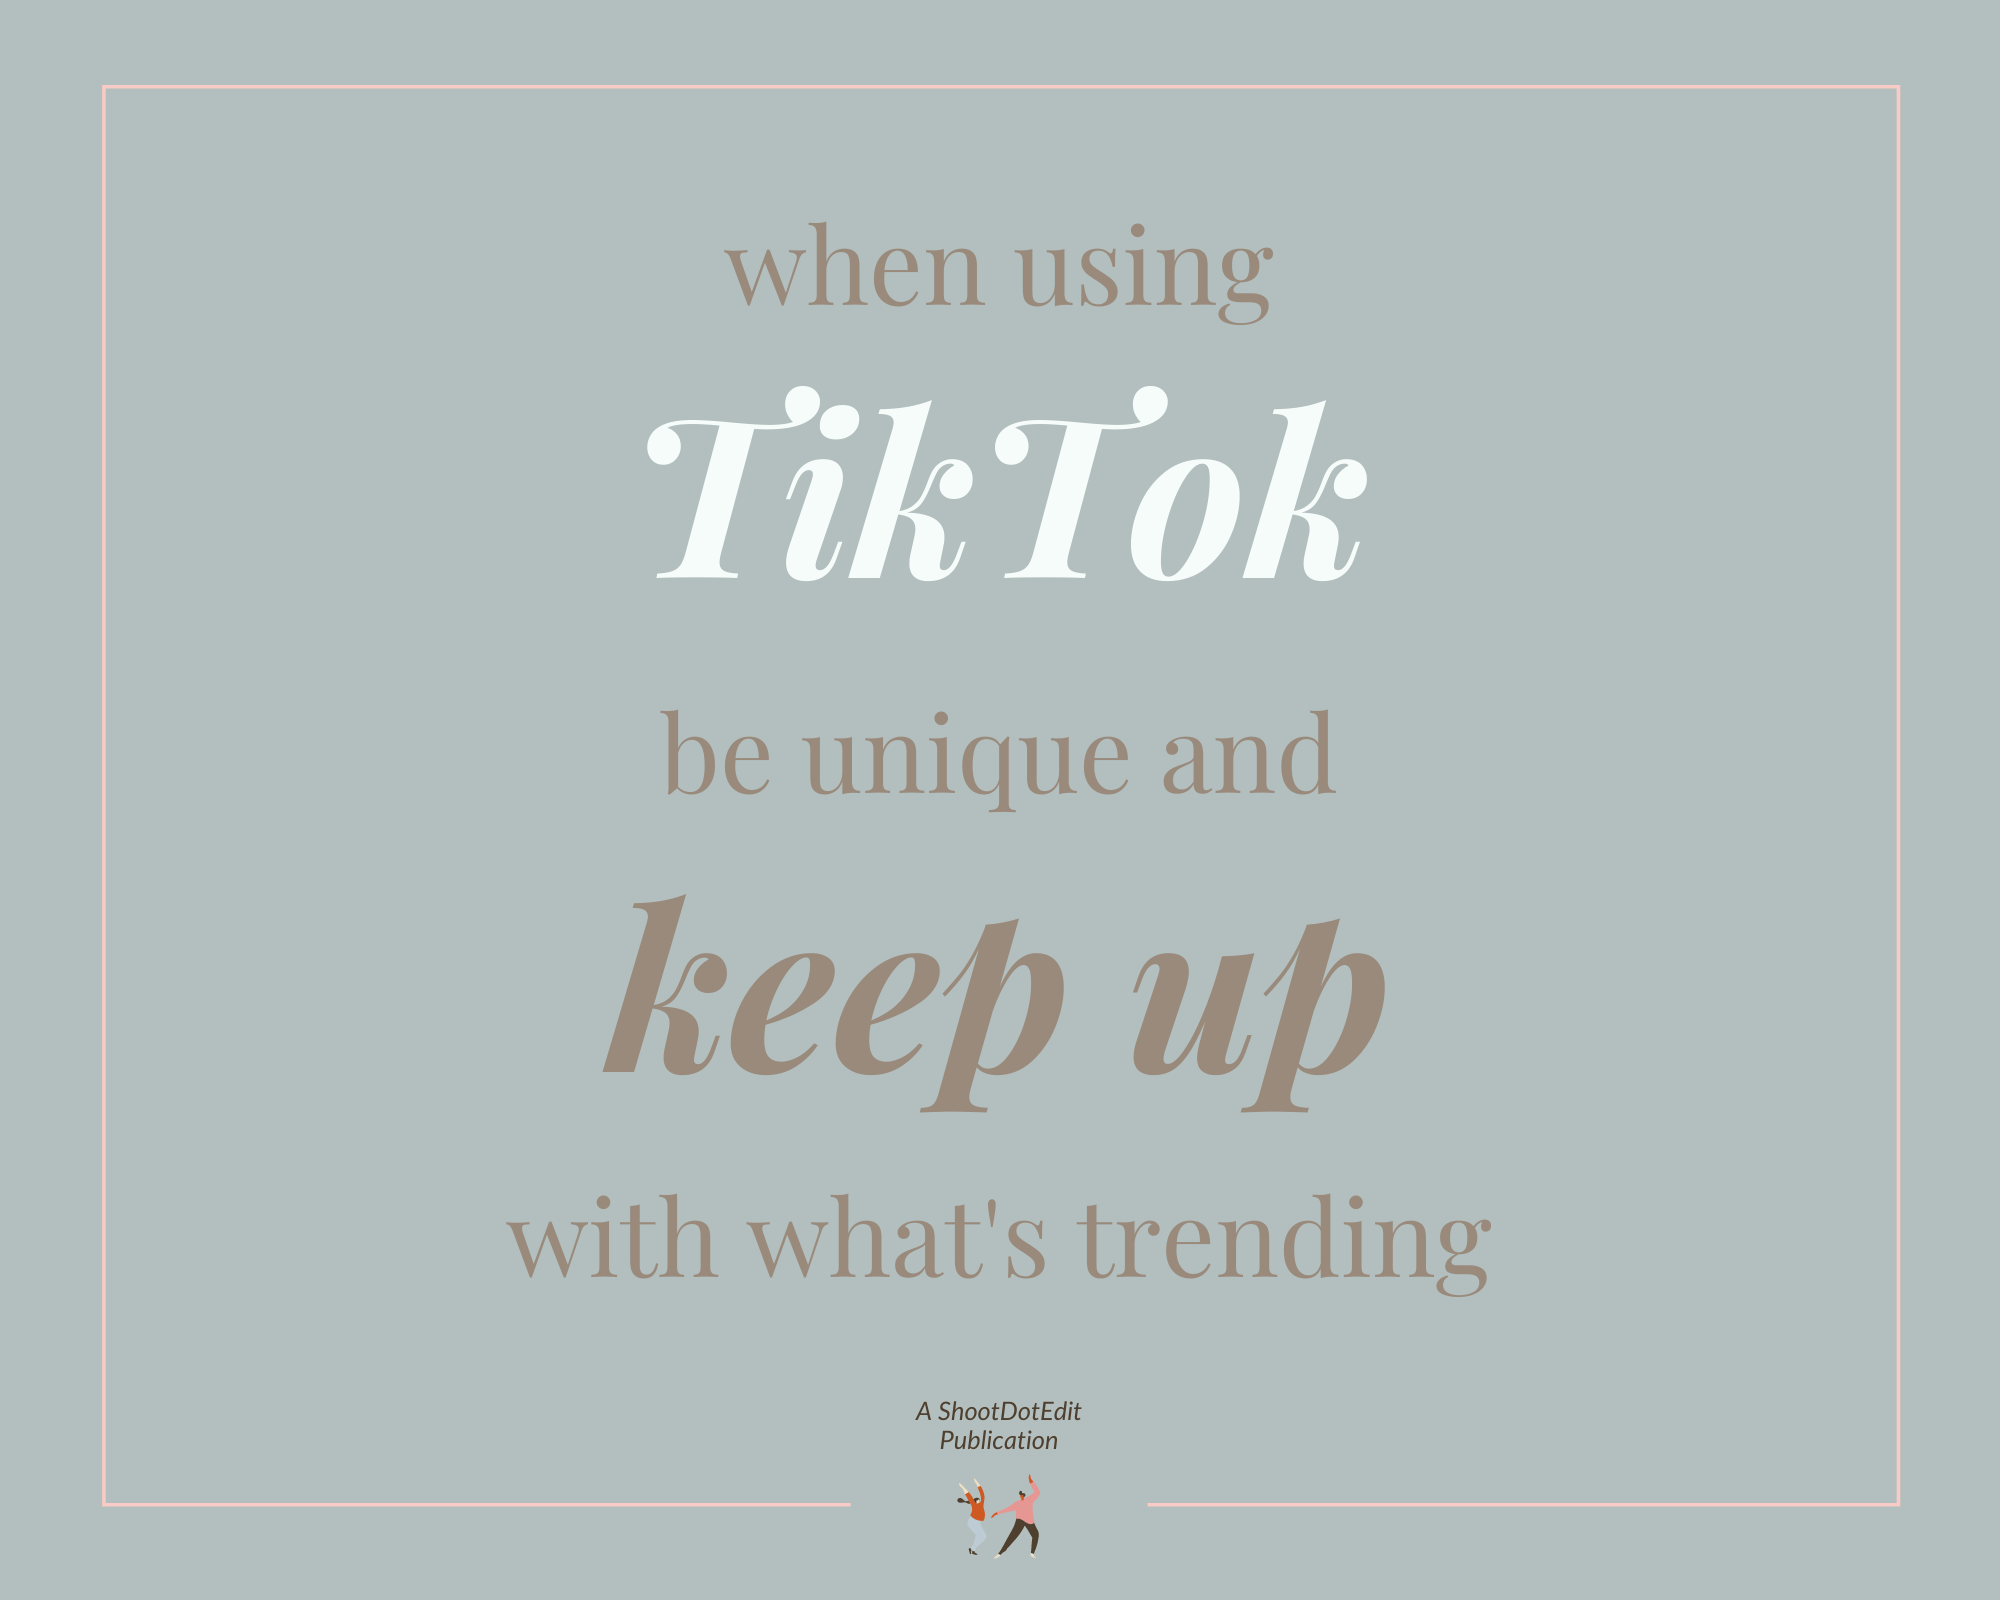 Infographic stating when using TikTok be unique and keep up with what is trending